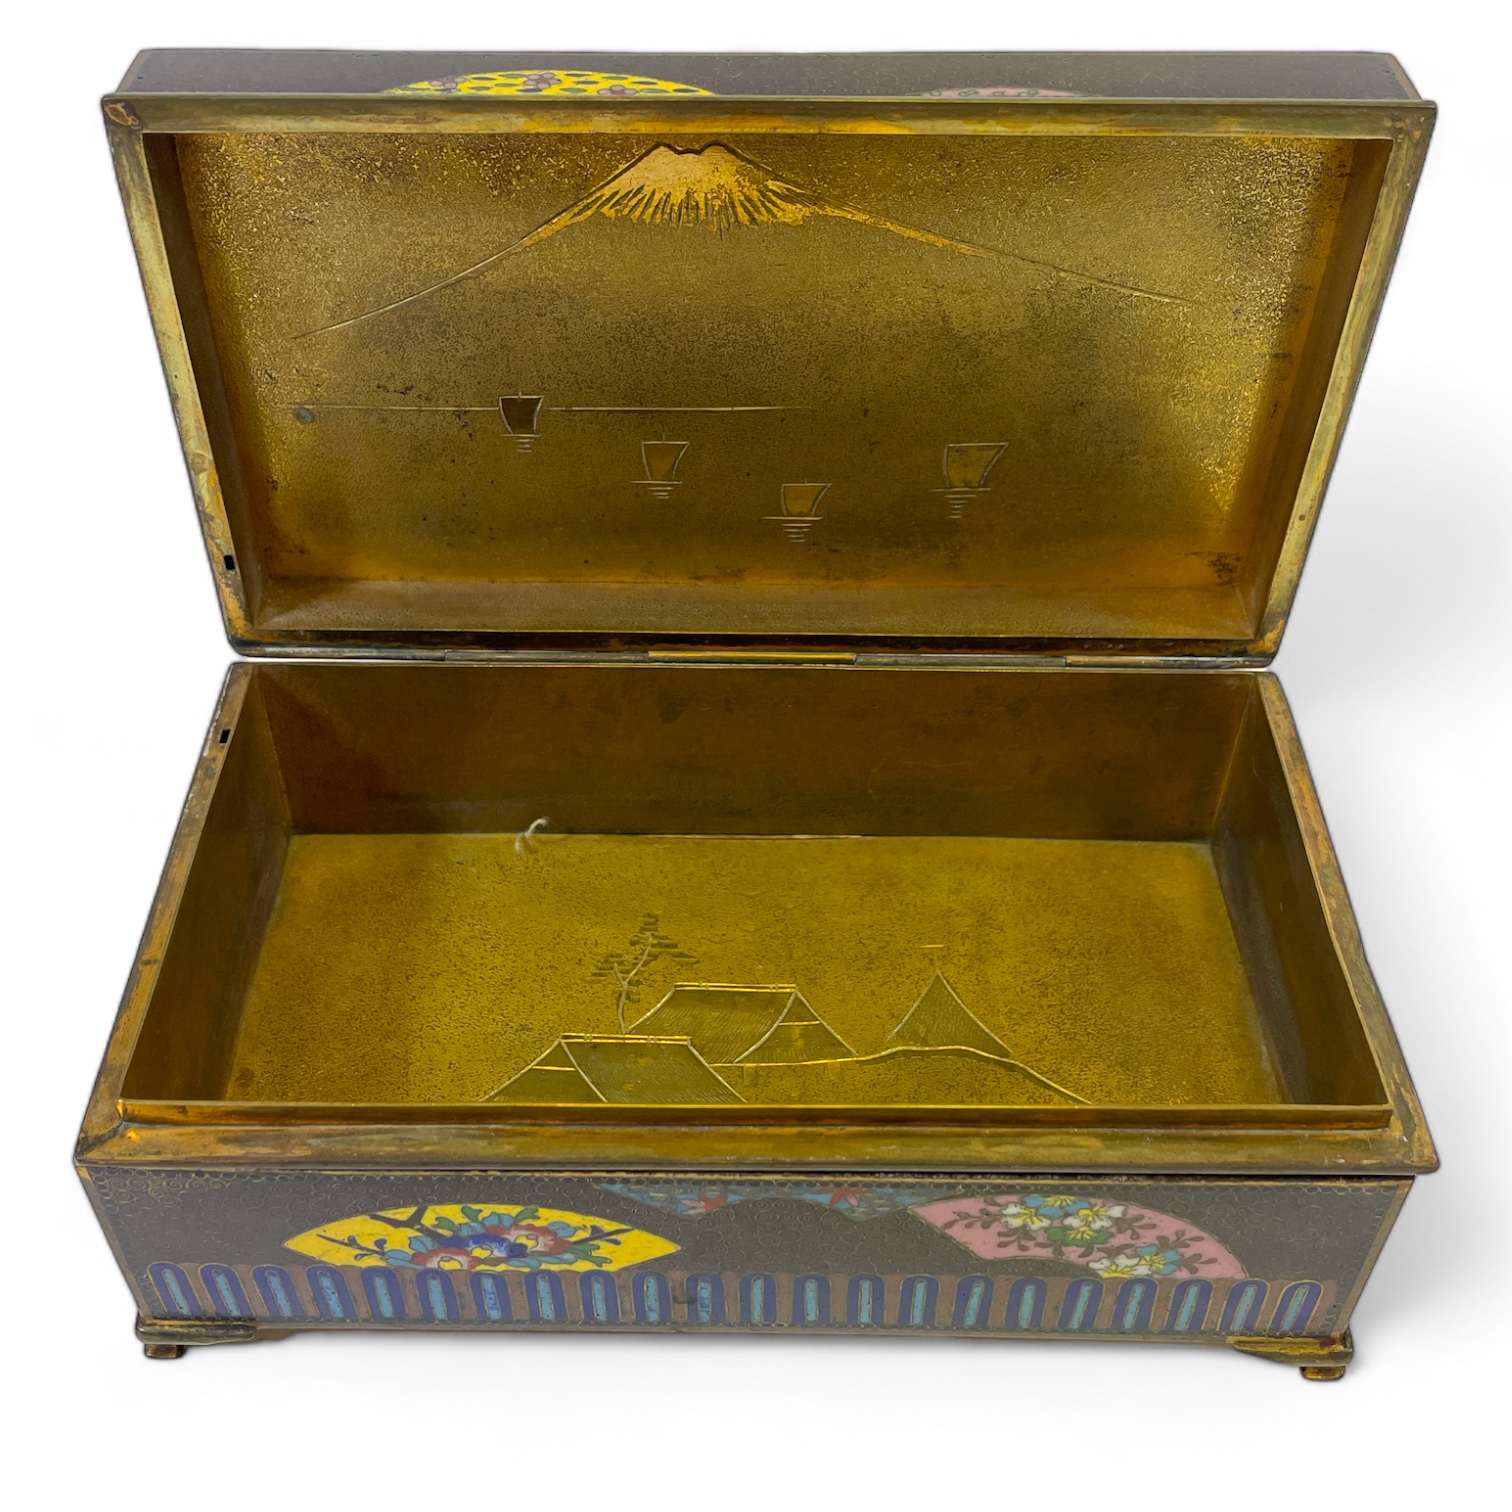 A Japanese Cloisonné enamel decorated desk box 17cm x 9cm x 7cm tall. Inner section is loose but - Image 2 of 2